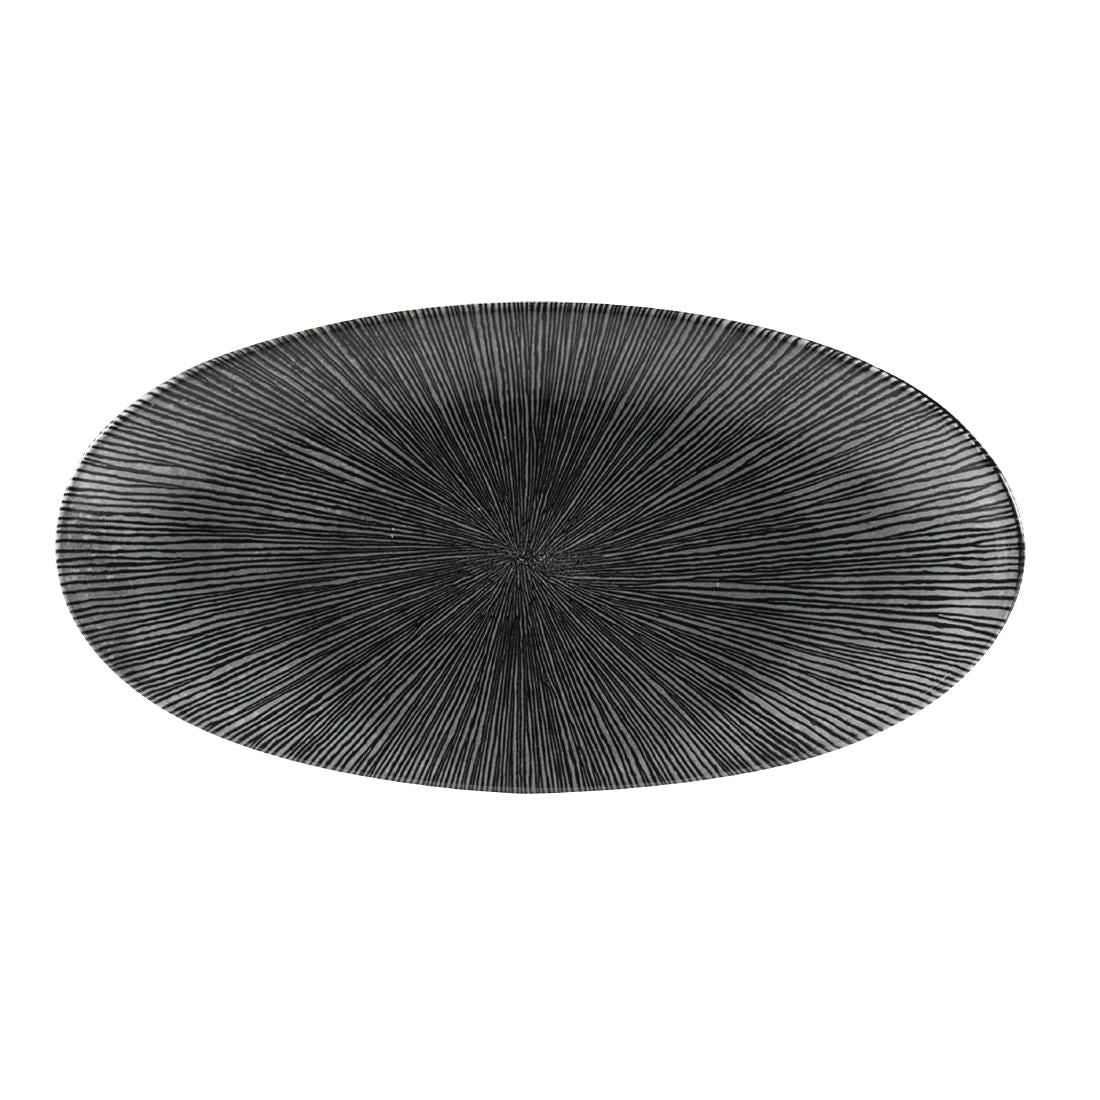 FC109 Churchill Studio Prints Agano Oval Chefs Plates Black 299 x 150mm (Pack of 12) JD Catering Equipment Solutions Ltd